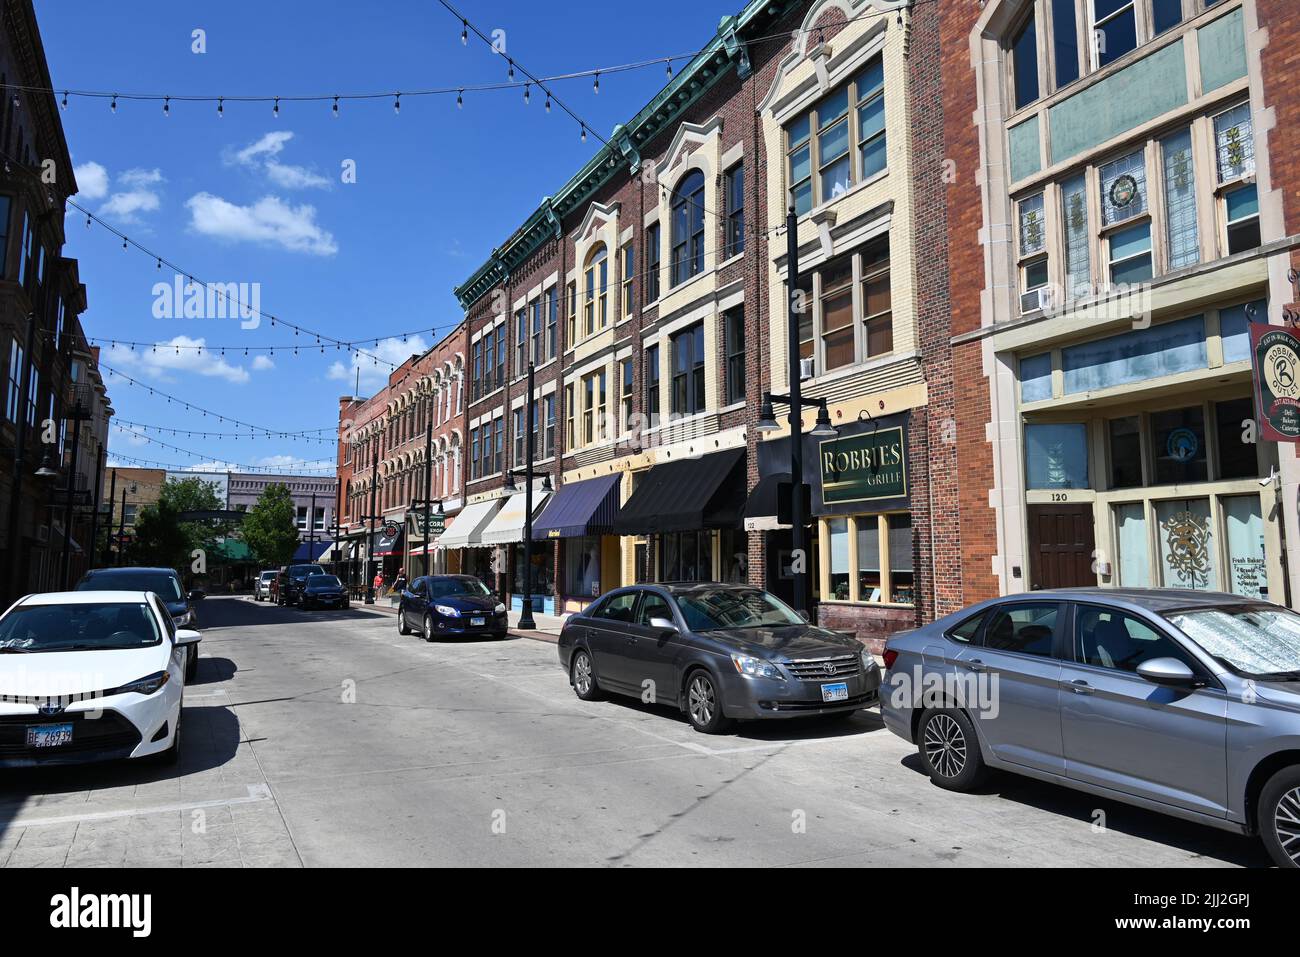 Storefronts along Merchant Street in the historic downtown district of Decatur, Illinois. Stock Photo